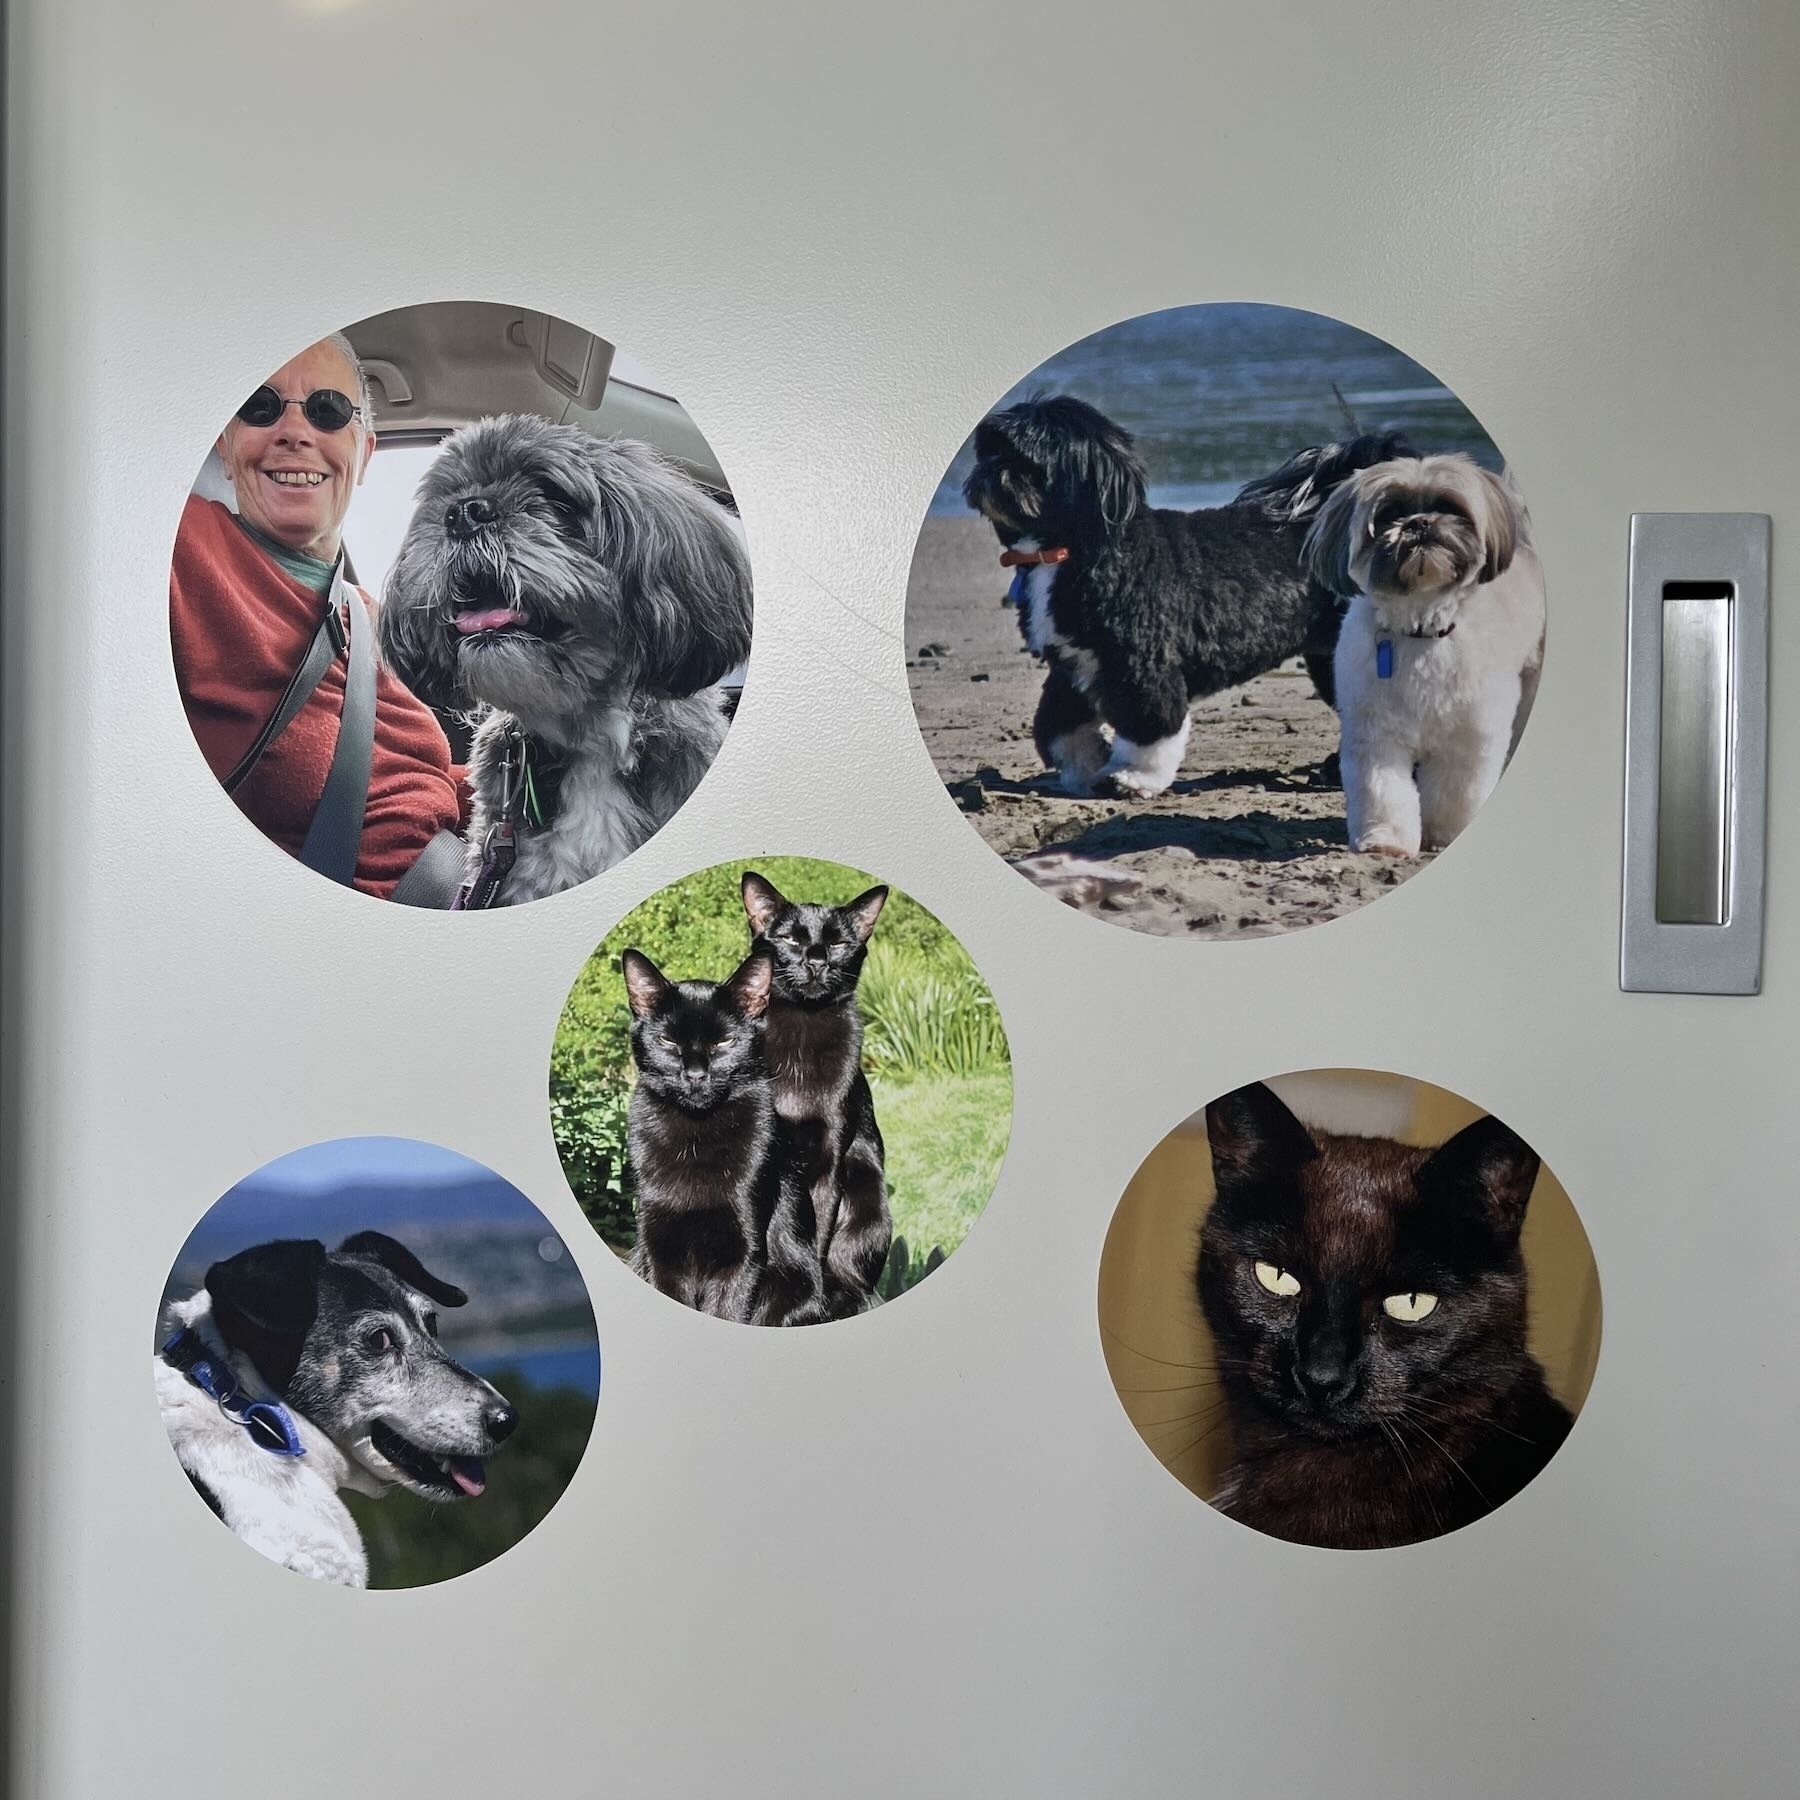 Round decals showing cats and dogs.